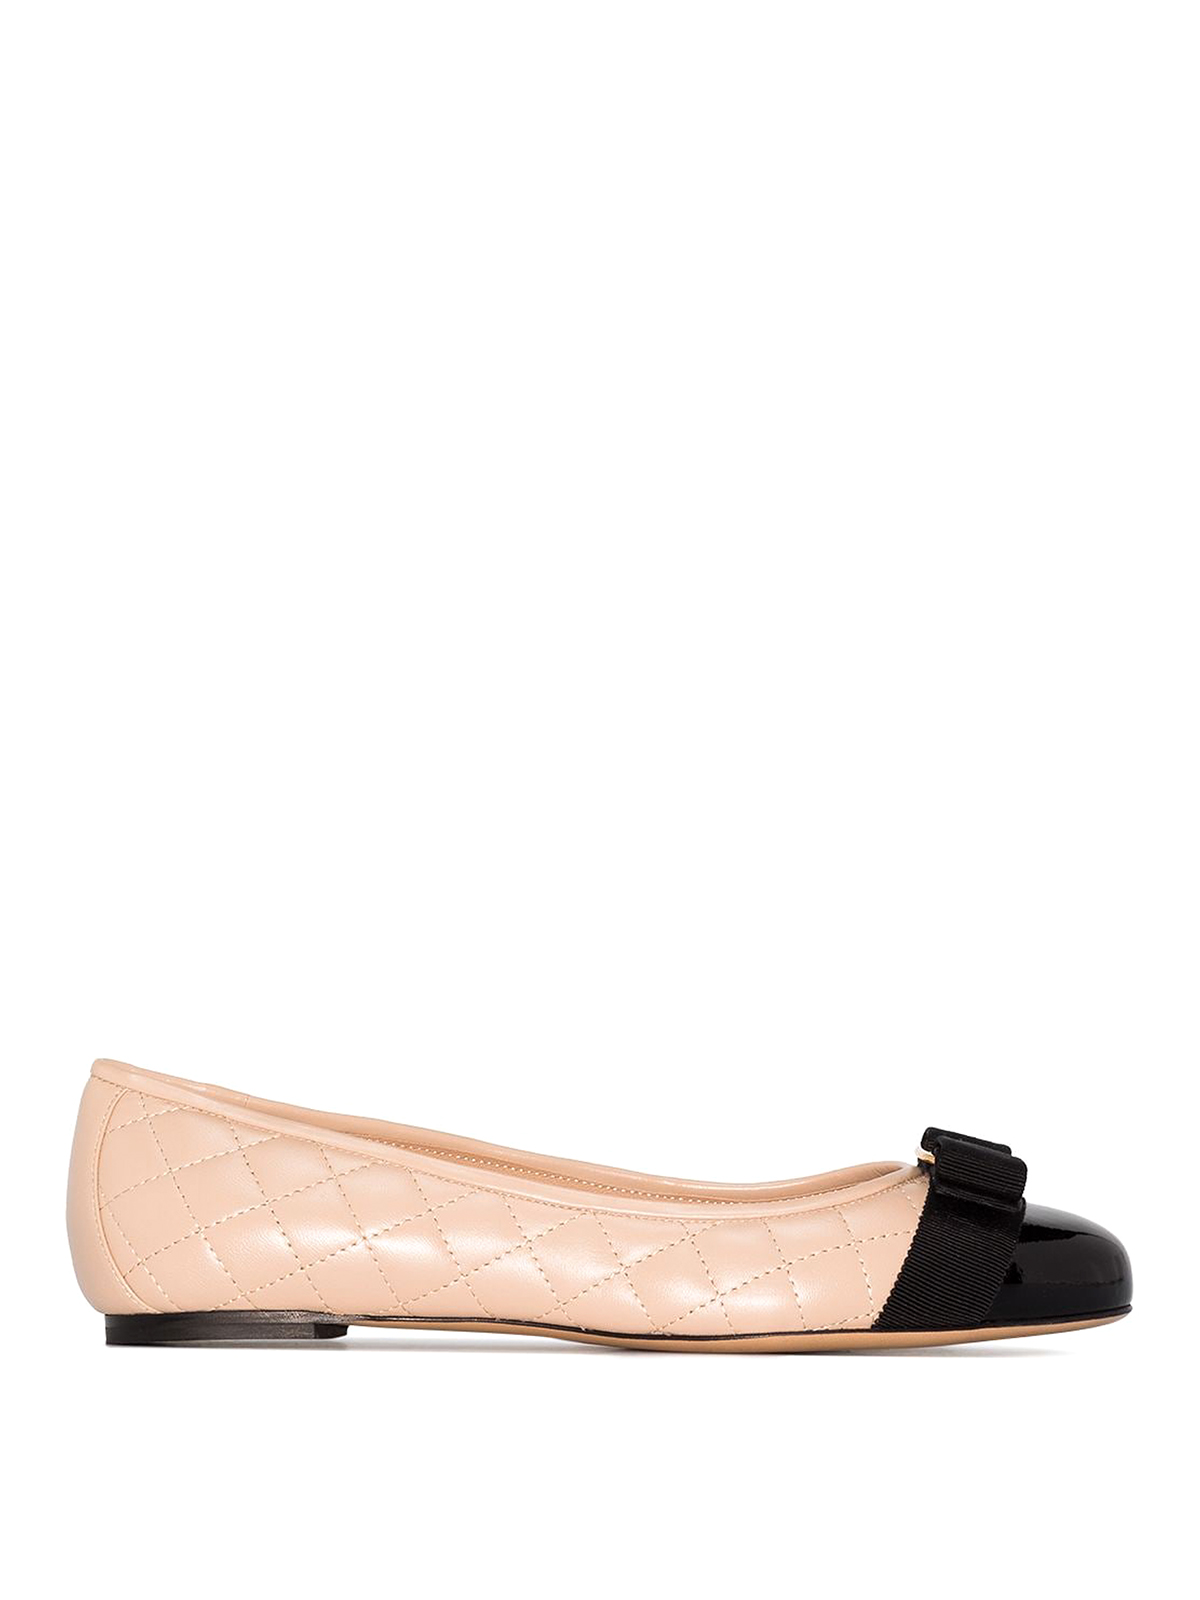 Shop Ferragamo Vara Quilted Leather Ballet Flats In Nude & Neutrals